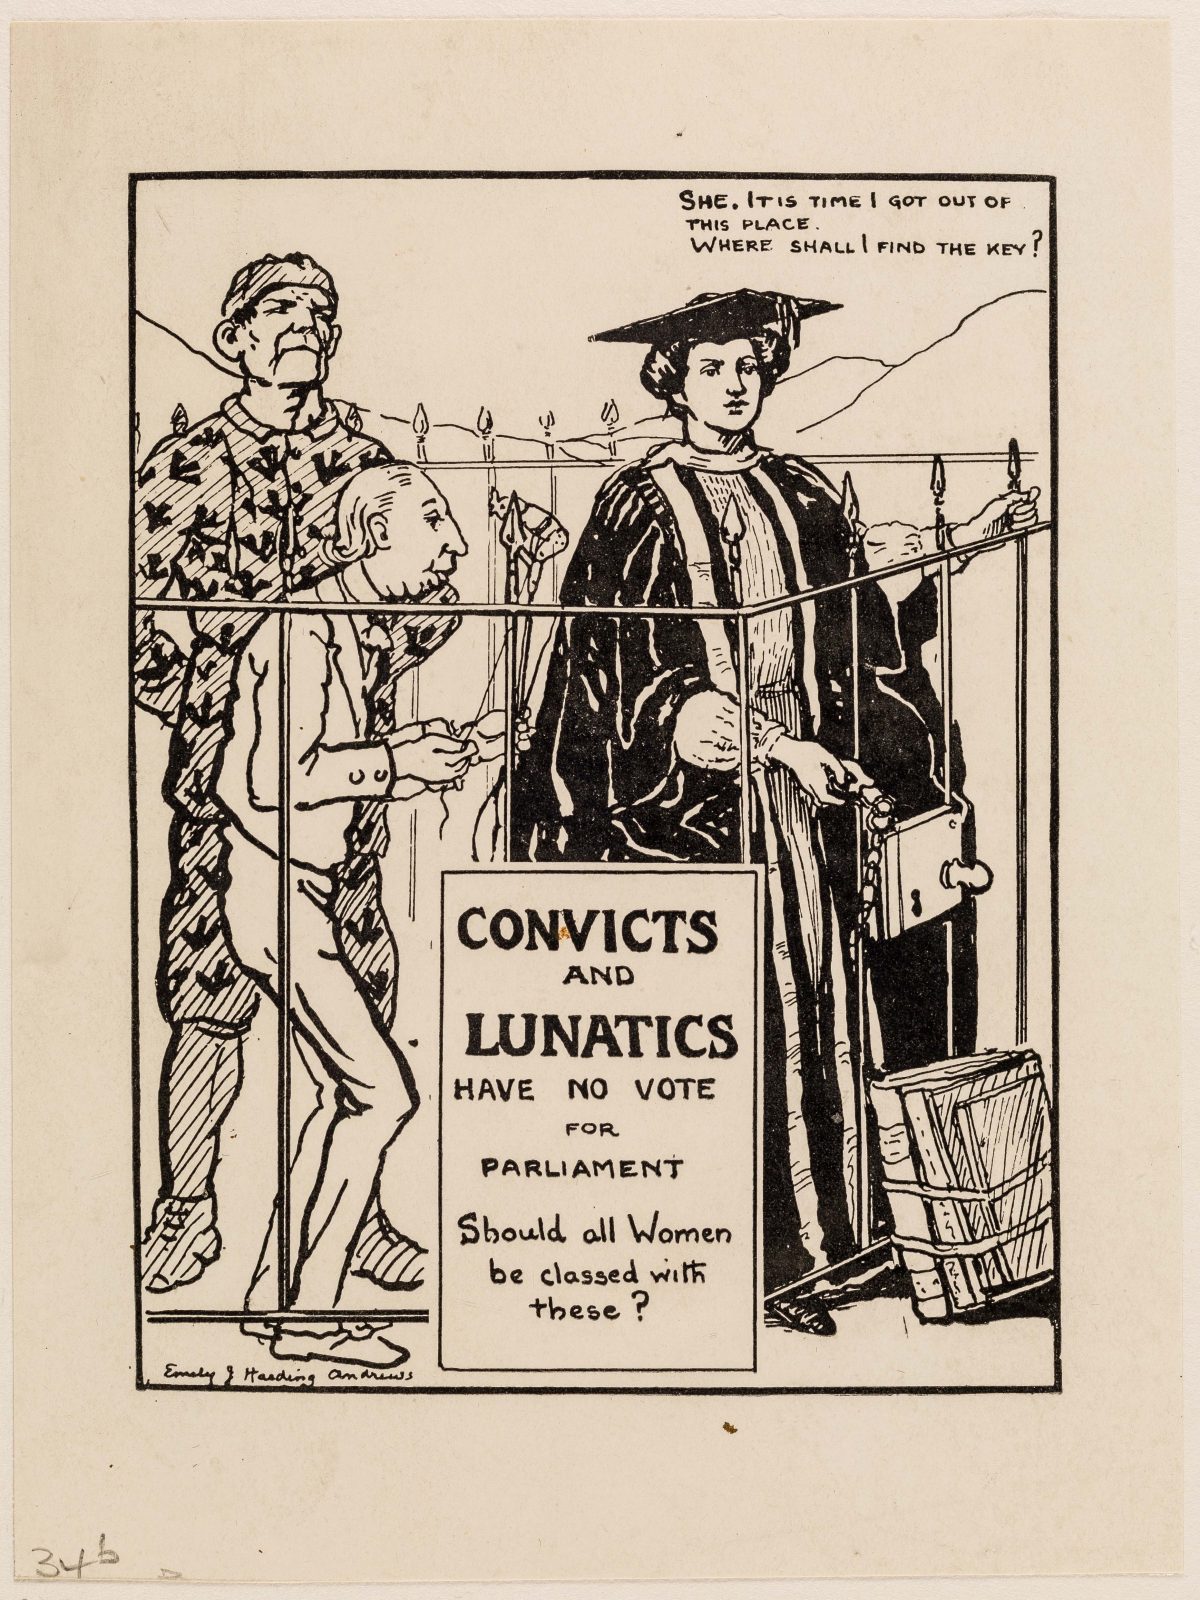 Mary Lowndes suffrage art for the Artists’ Suffrage League